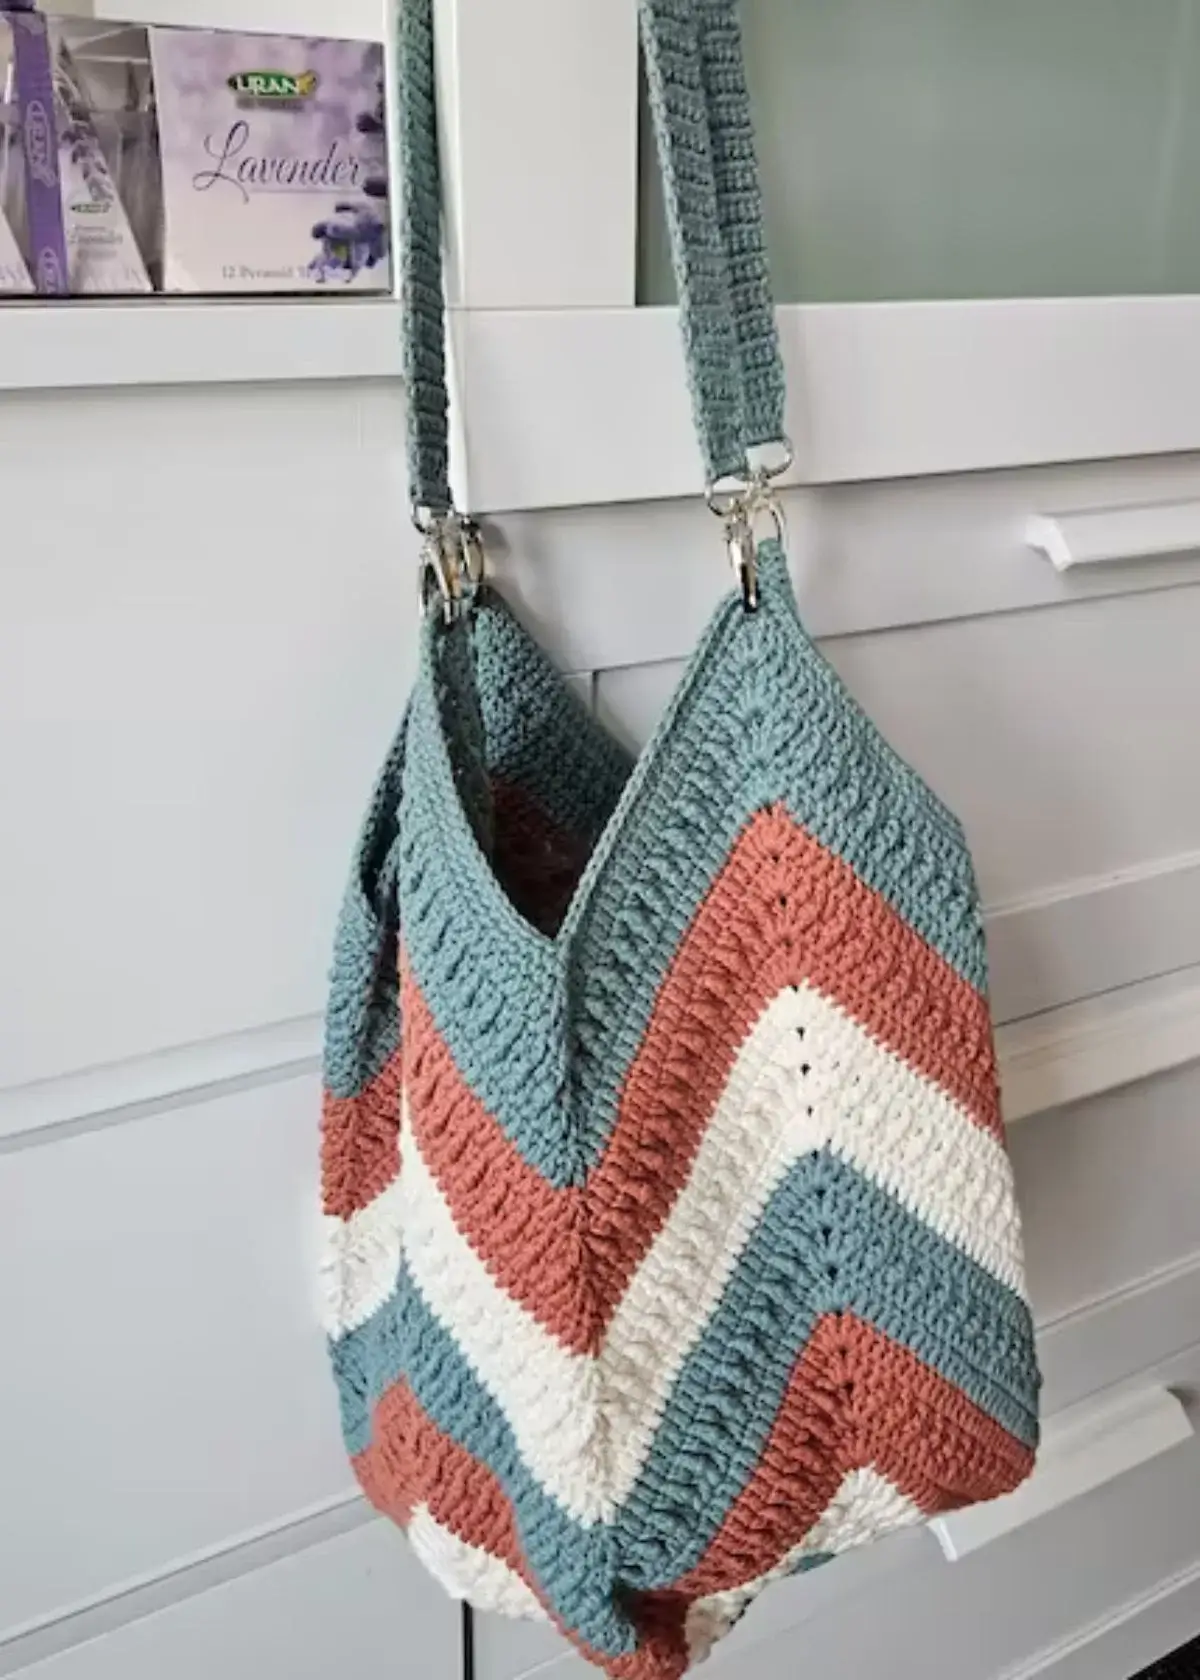 What types of yarn are best for crochet bags?